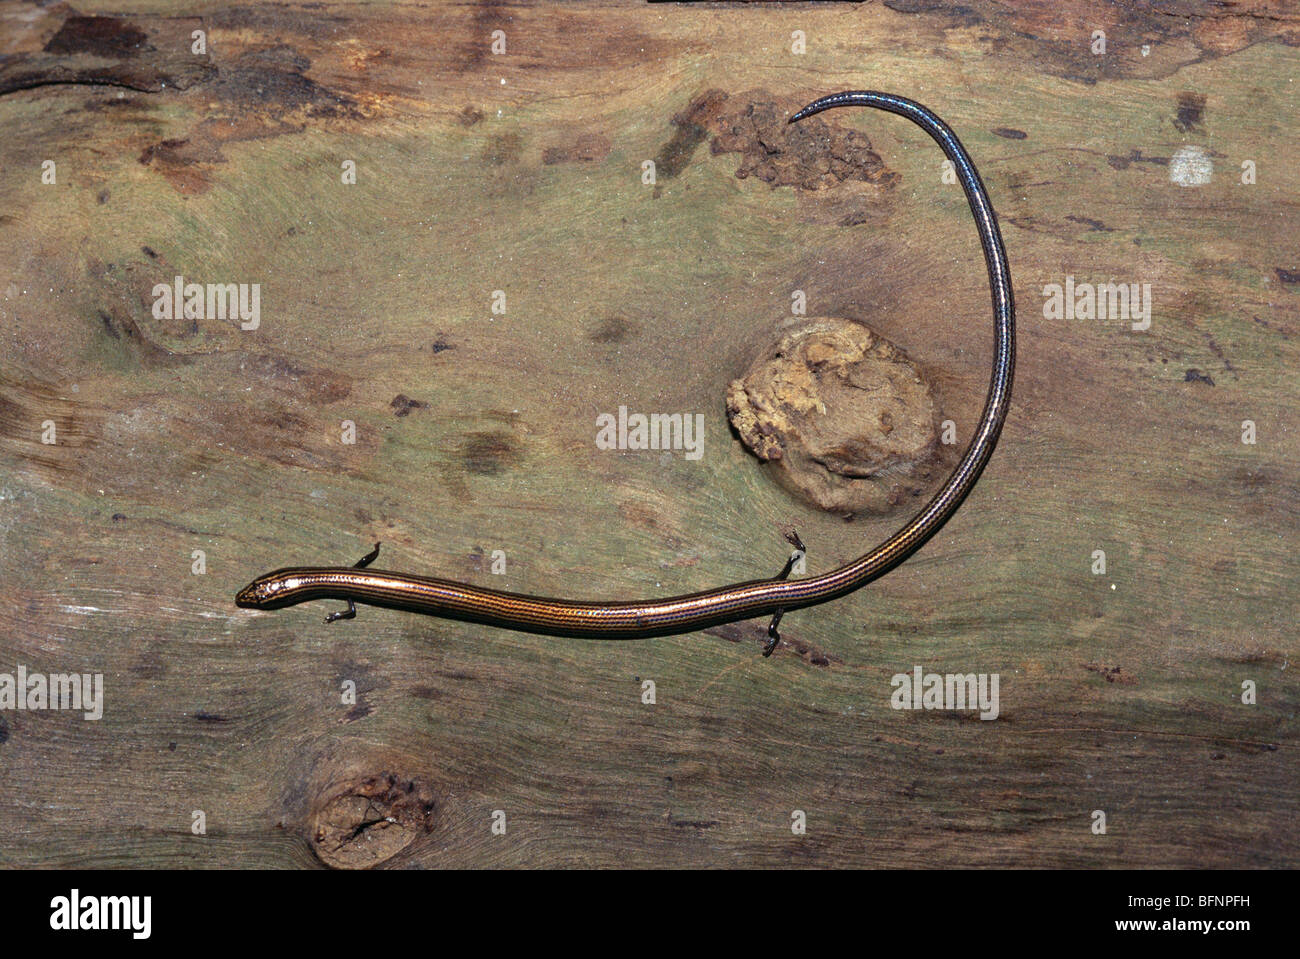 IKA 60397 : Insects ; lizard Indian Common Snake skink riopa sp Stock Photo